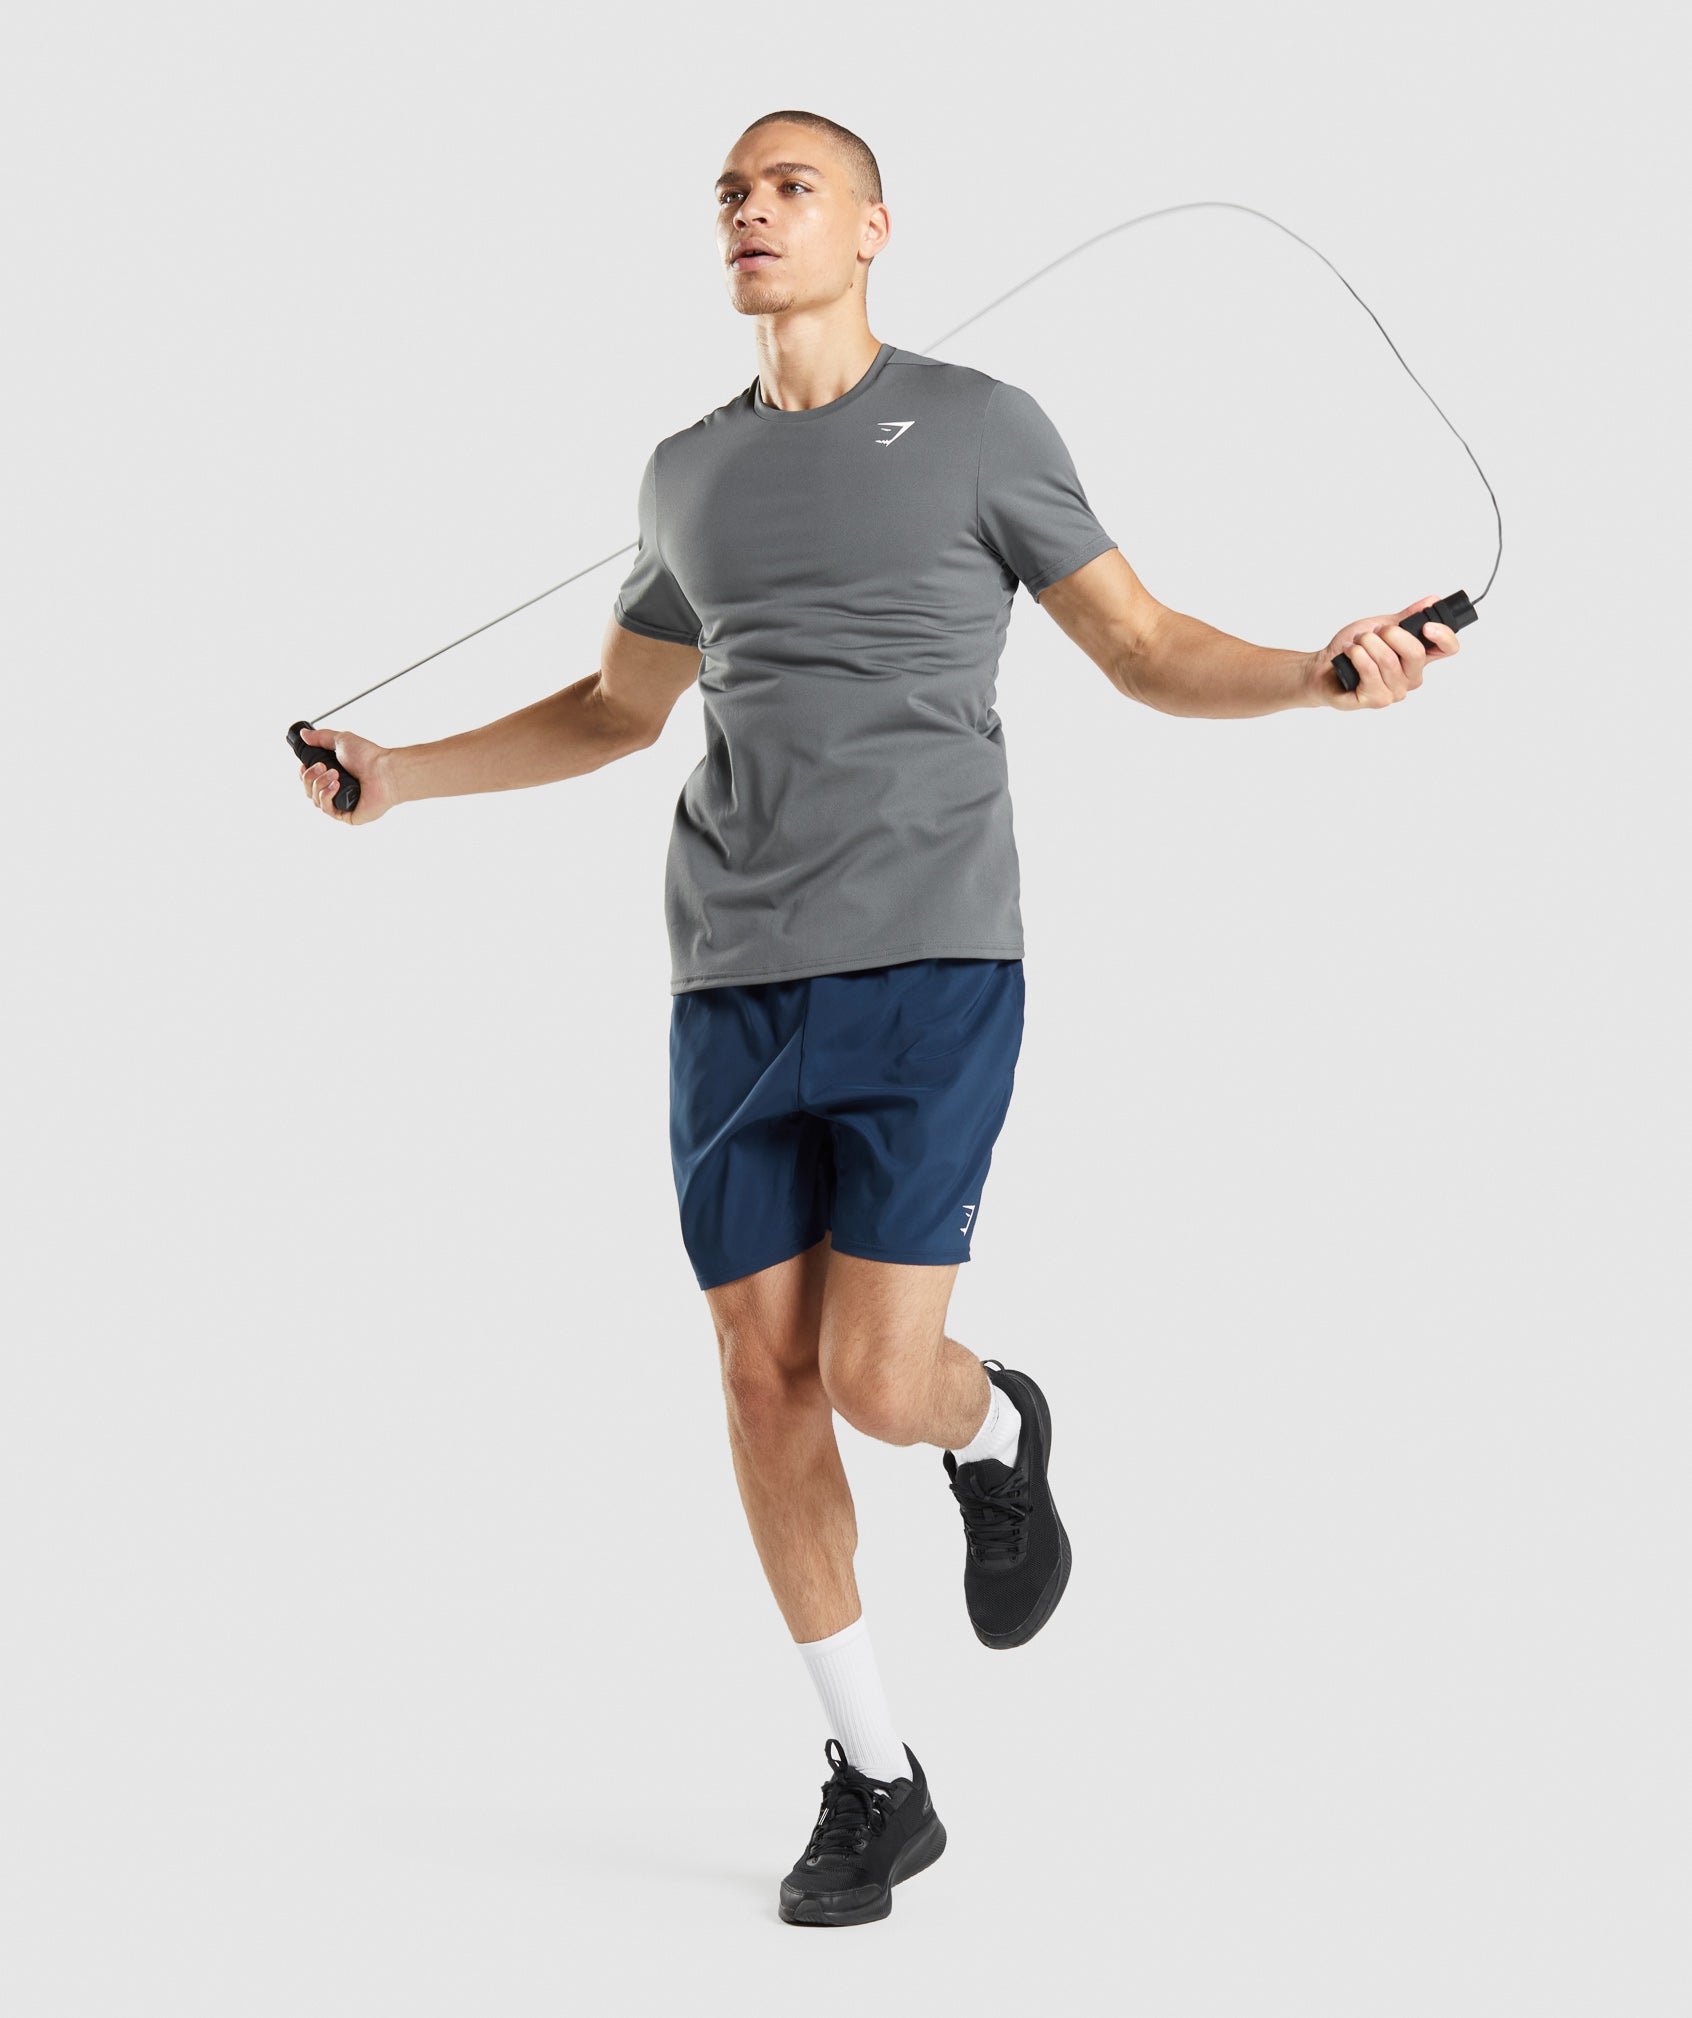 Weighted Jump Rope in Black - view 3